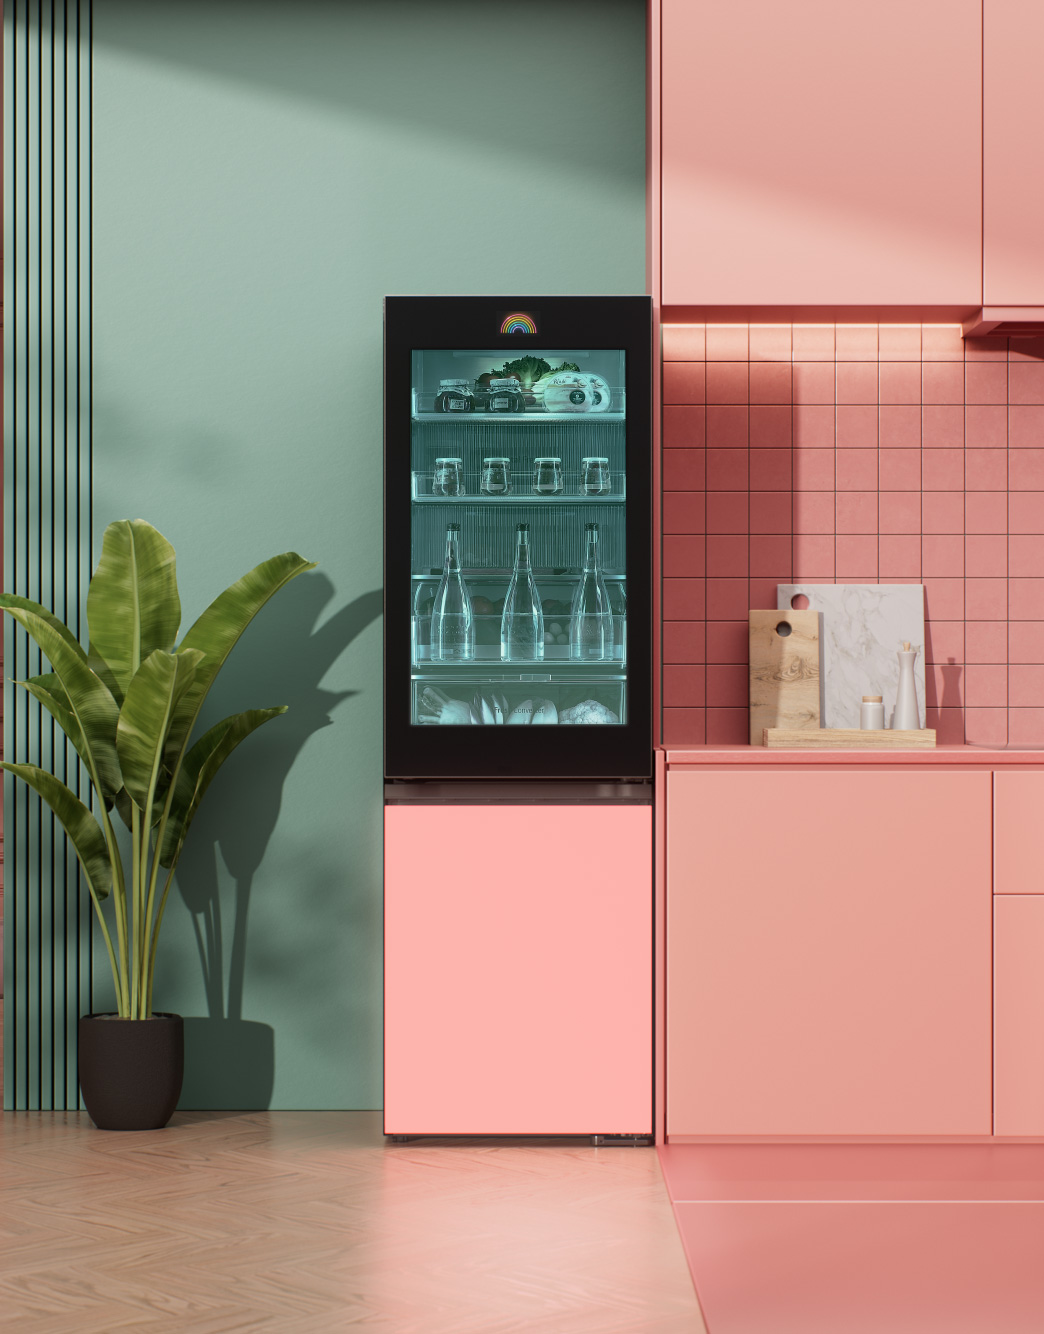 LG InstaView refrigerators: colors, music and revolution in the kitchen